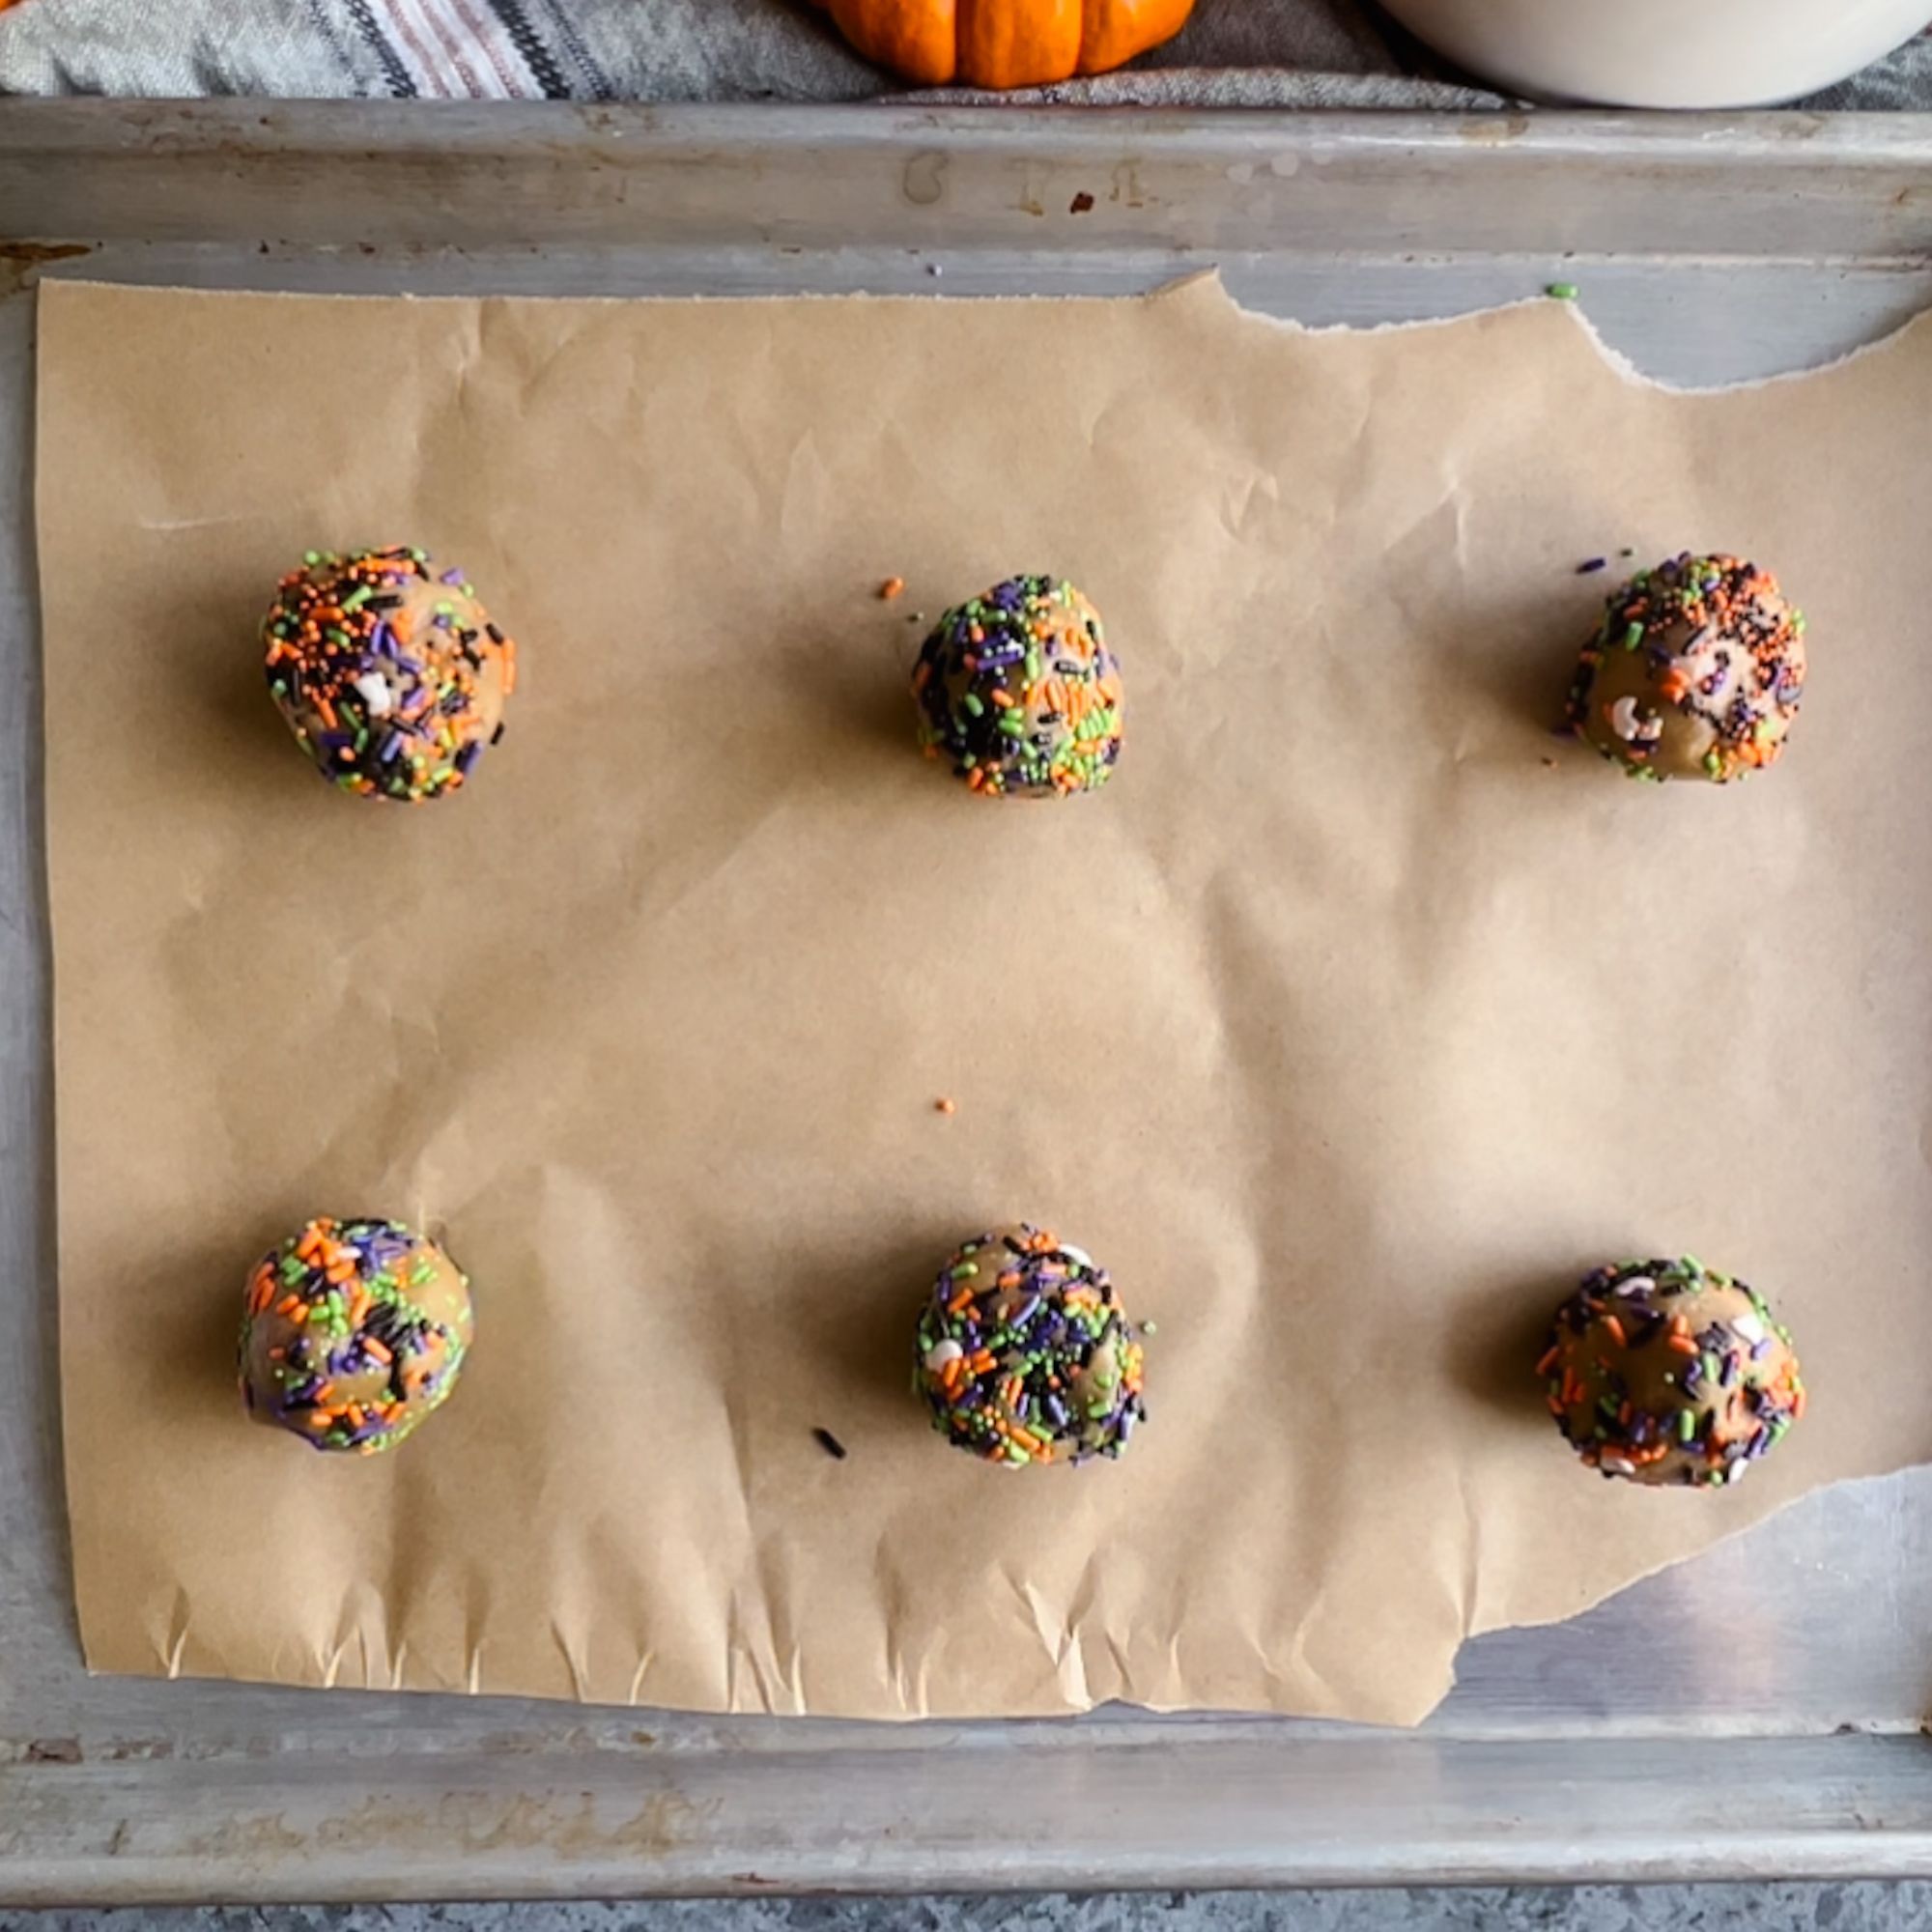 Six cookie dough balls on a parchment lined baking sheet ready to be baked. 